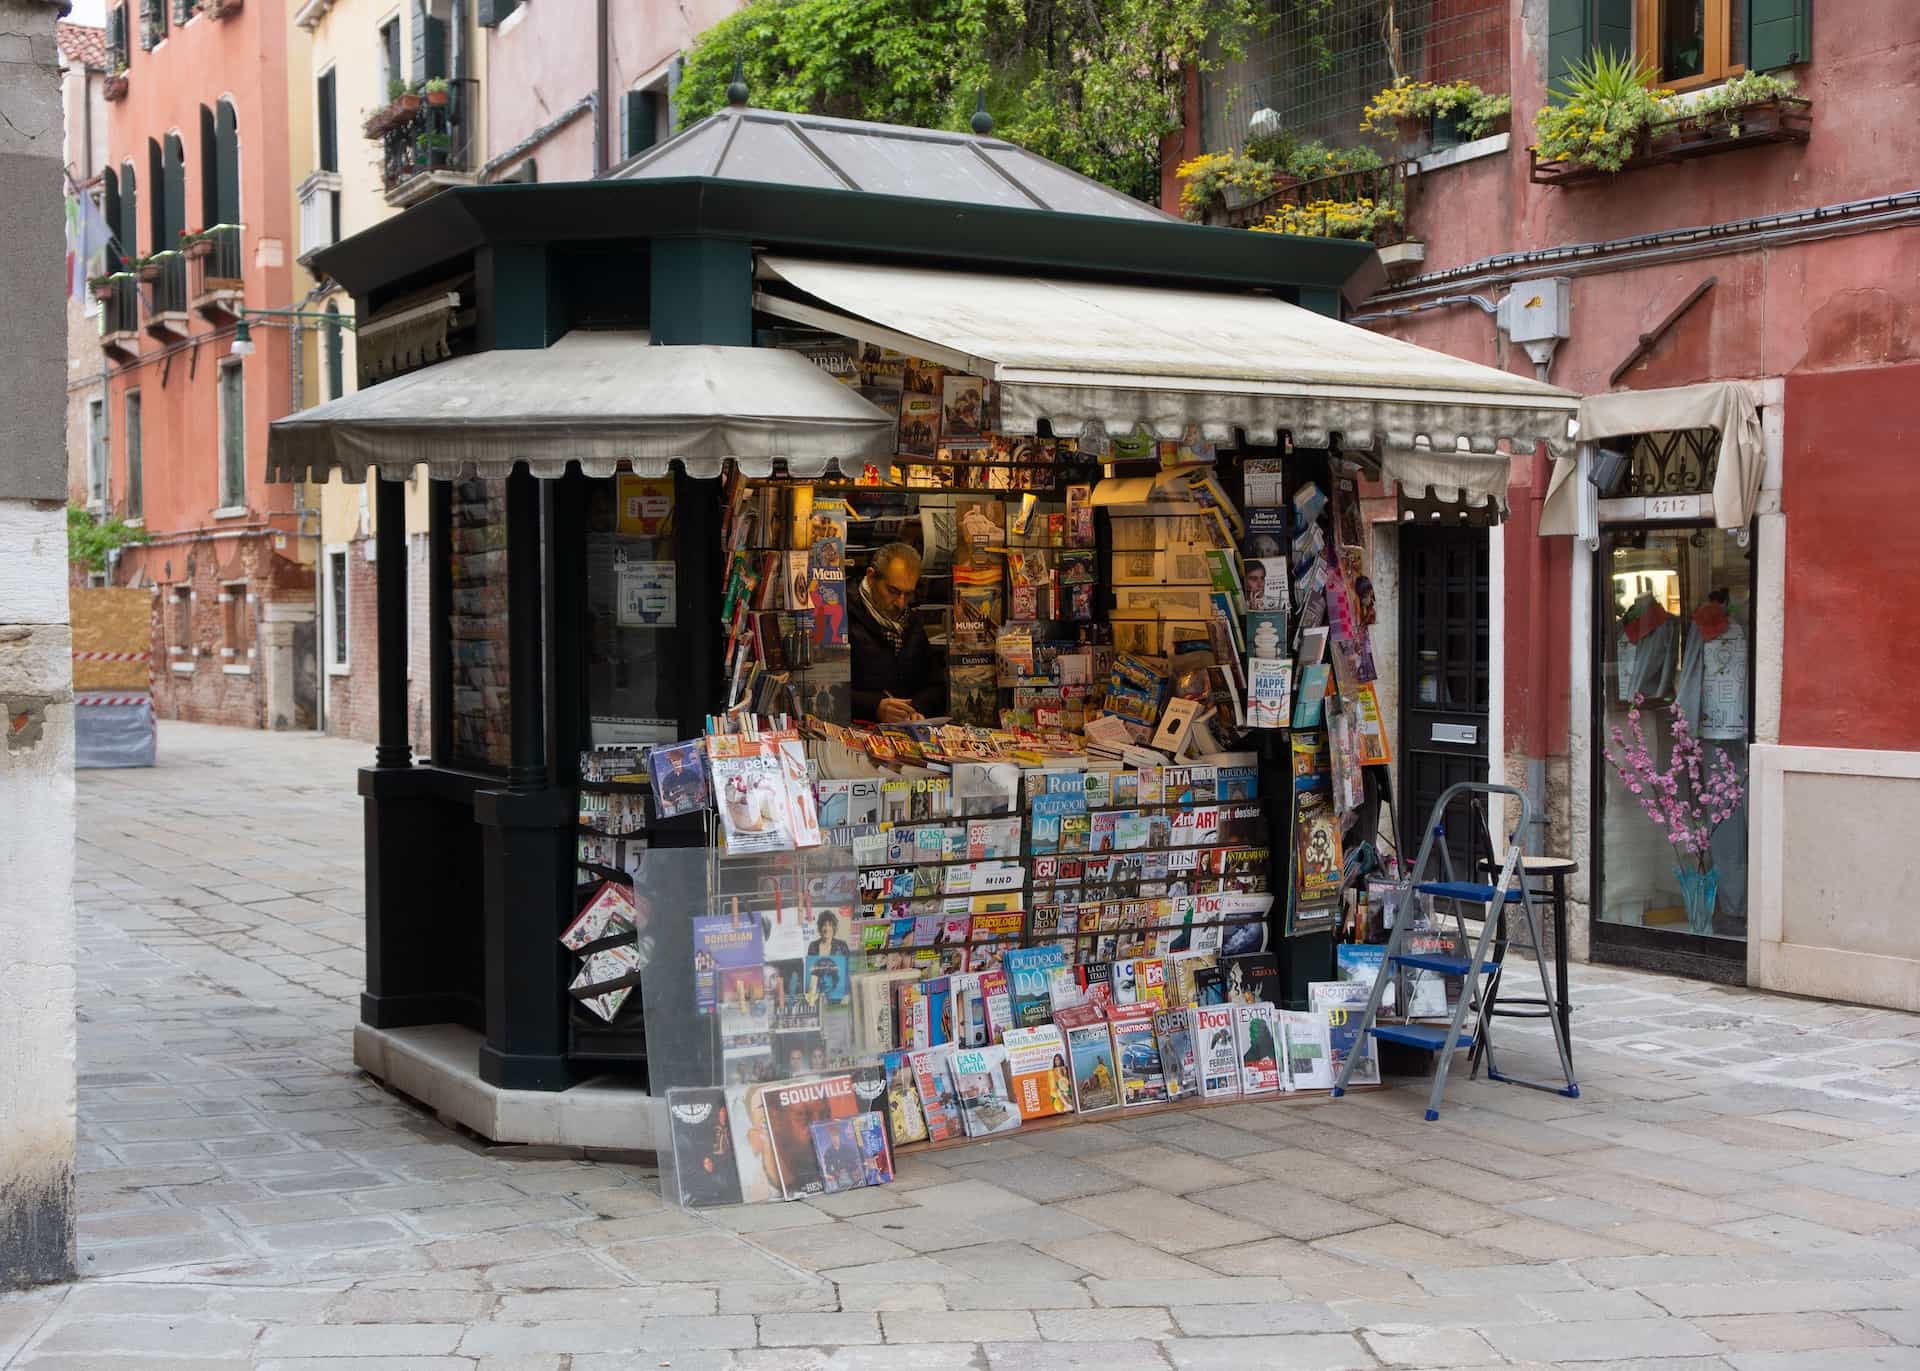 A kiosk selling newspapers and other items.